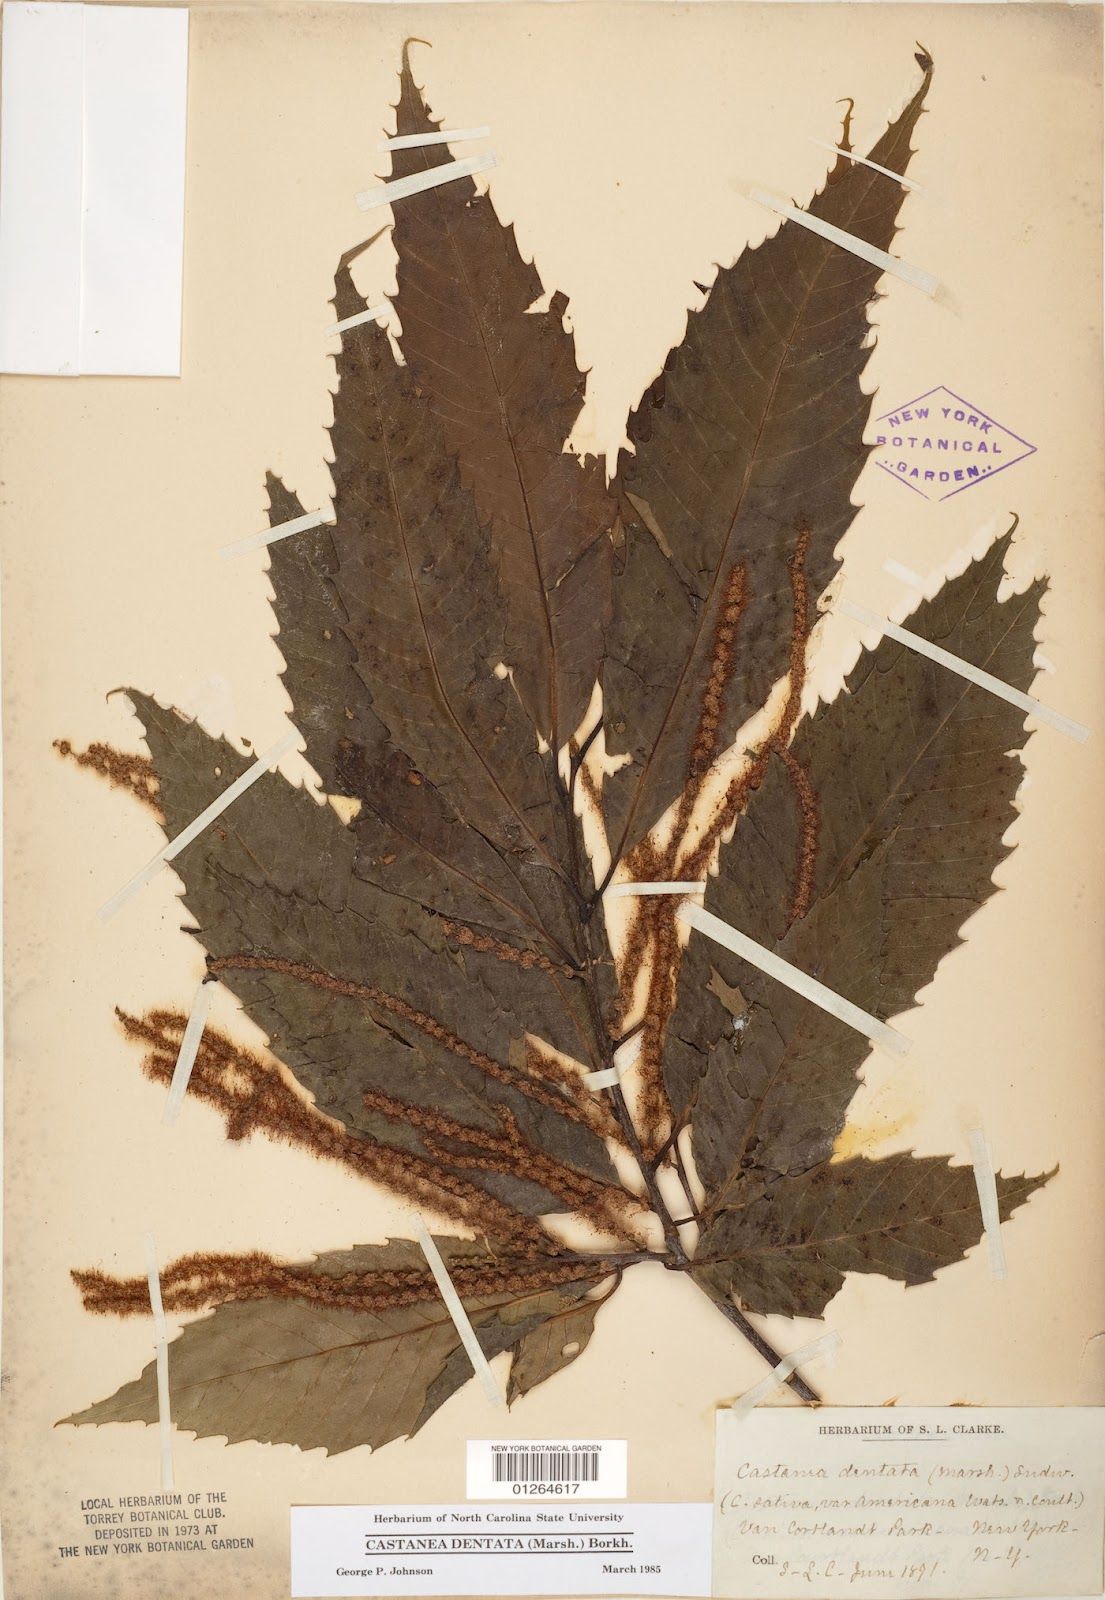 The pressed, spiky leaf of an American Chestnut tree on a sheet of archival paper. Text identifies it as belonging to the Herbarium of North Carolina State University.